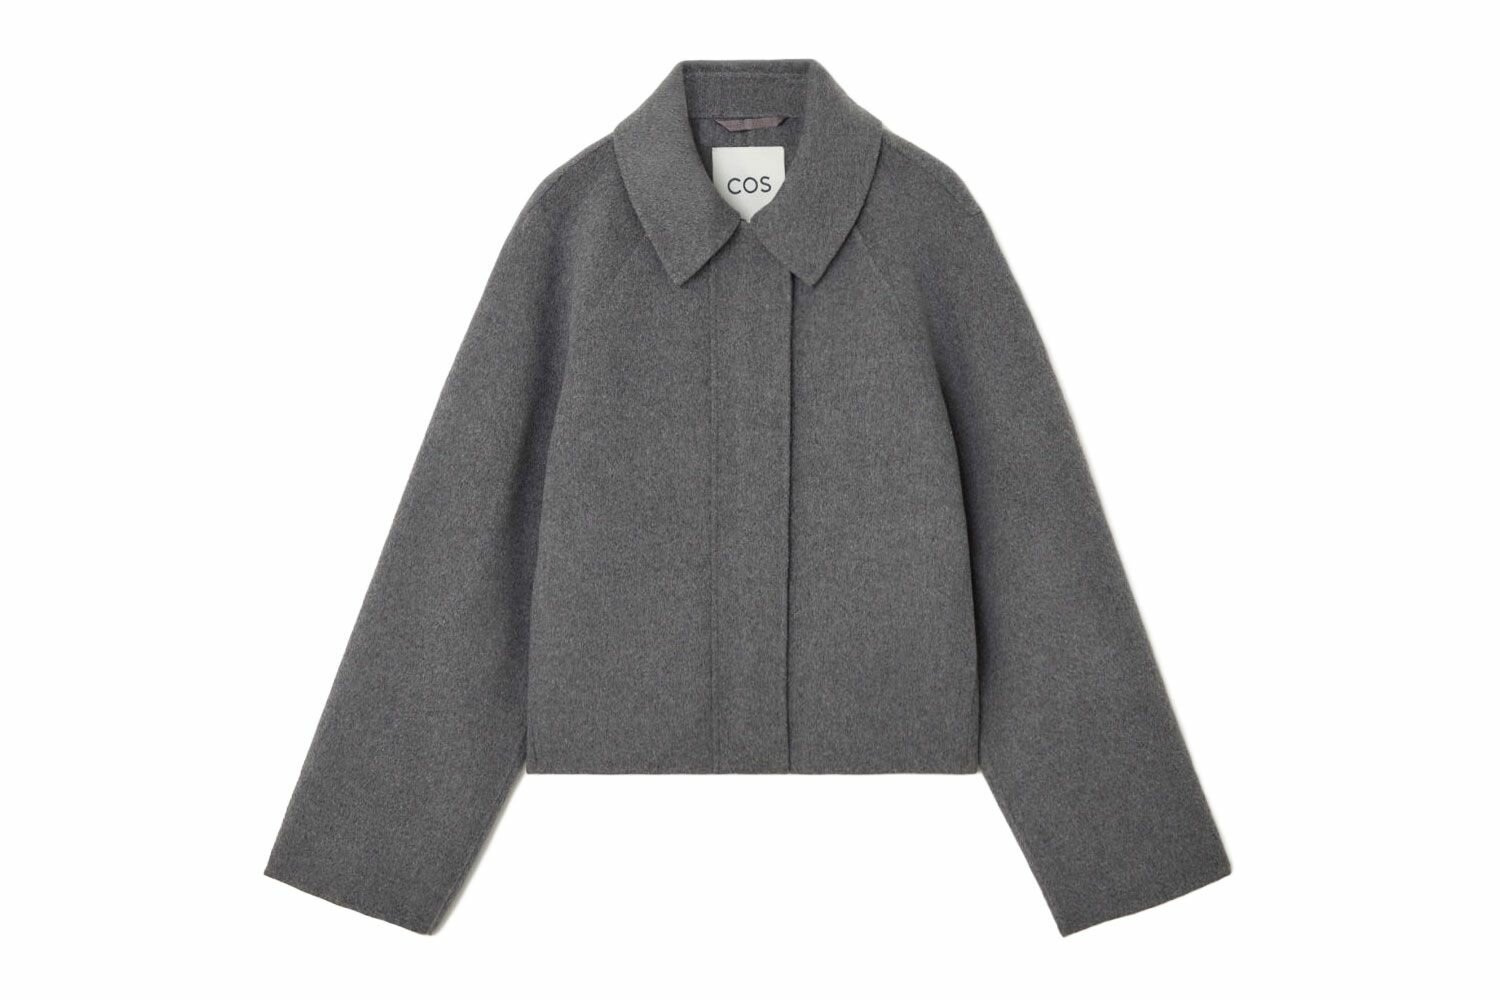 COS Short Double-Faced Wool Jacket